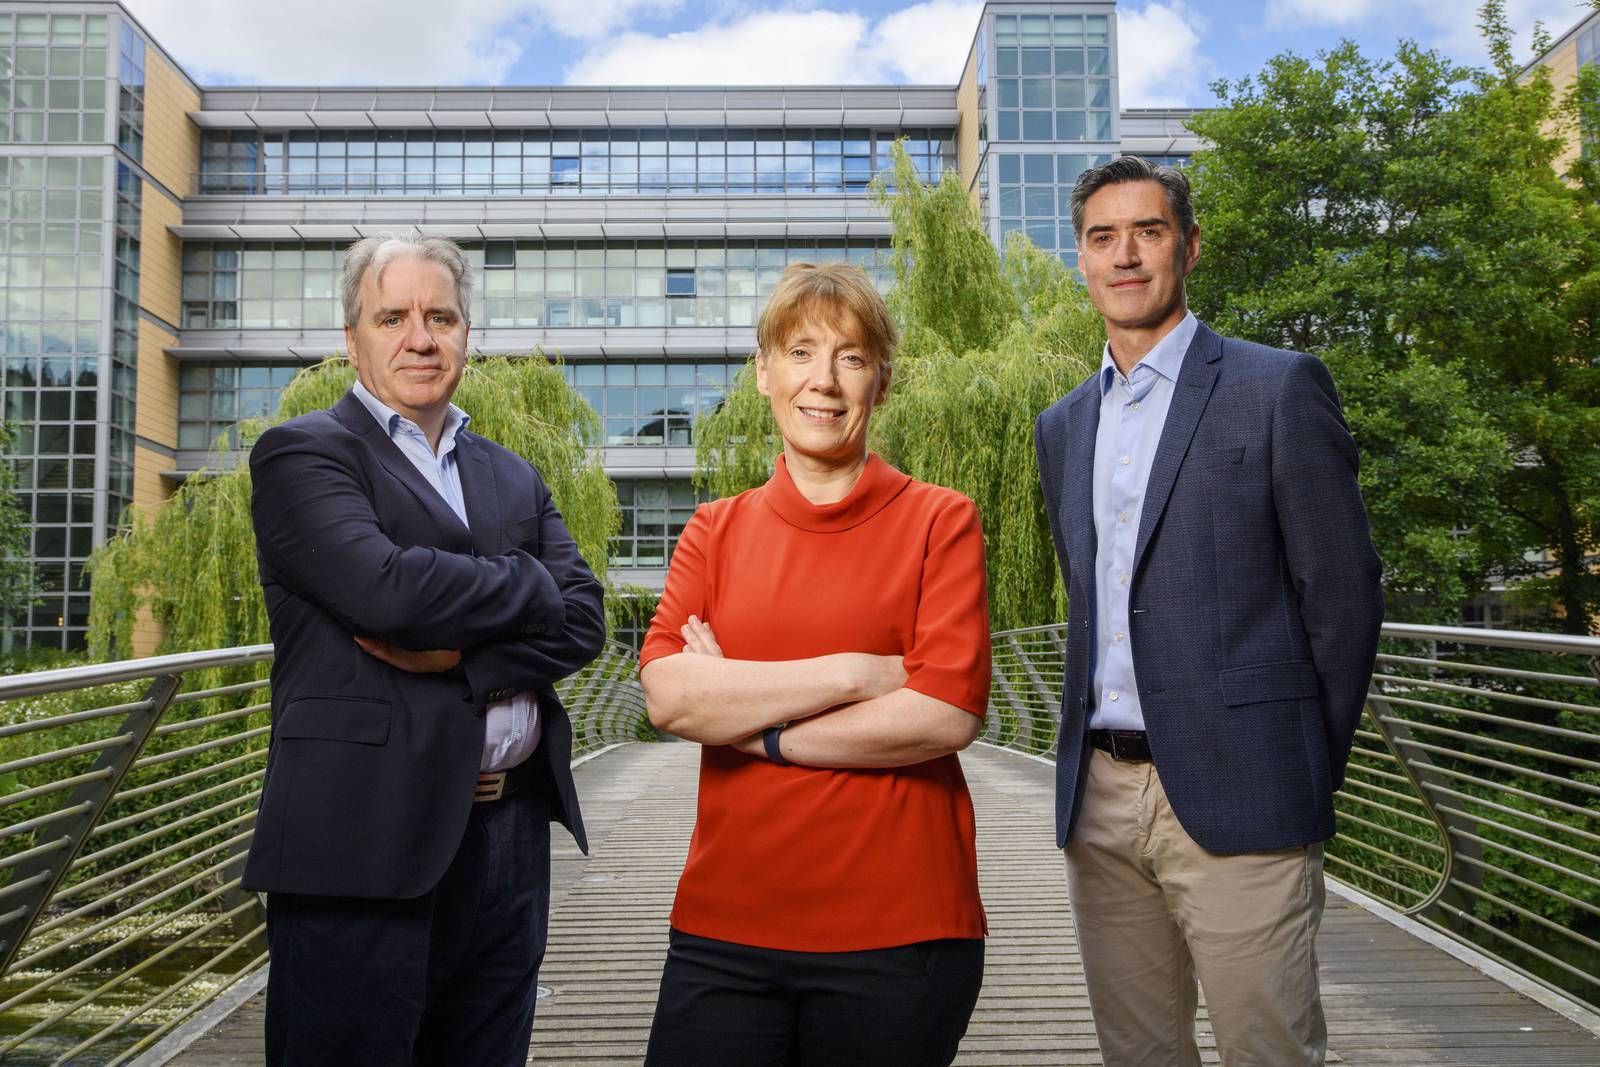 Newborn brain screener from UCC spin-out company CergenX awarded €6.7 million funding